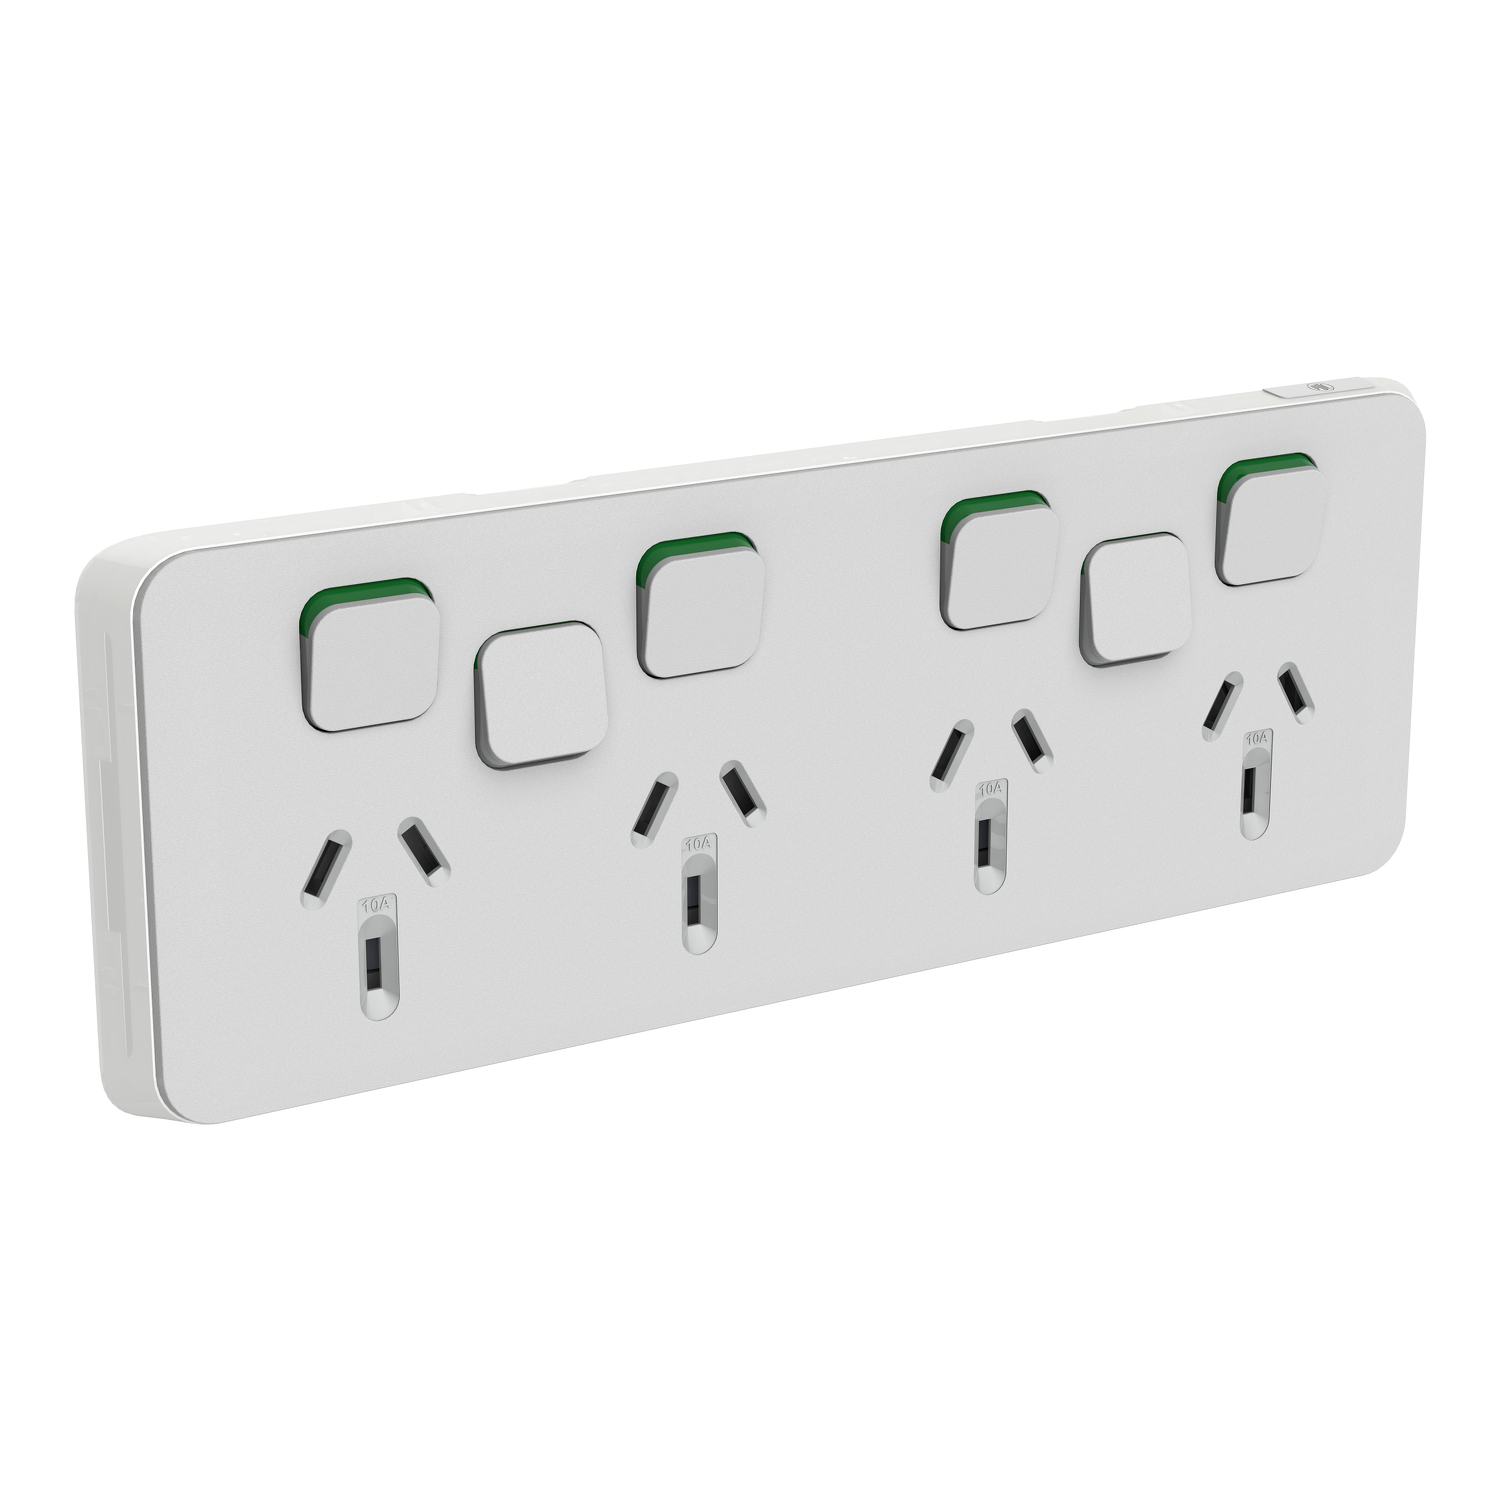 PDL Iconic - Cover Plates Quad Switched Socket 10A + 2 Switches - Cool Grey